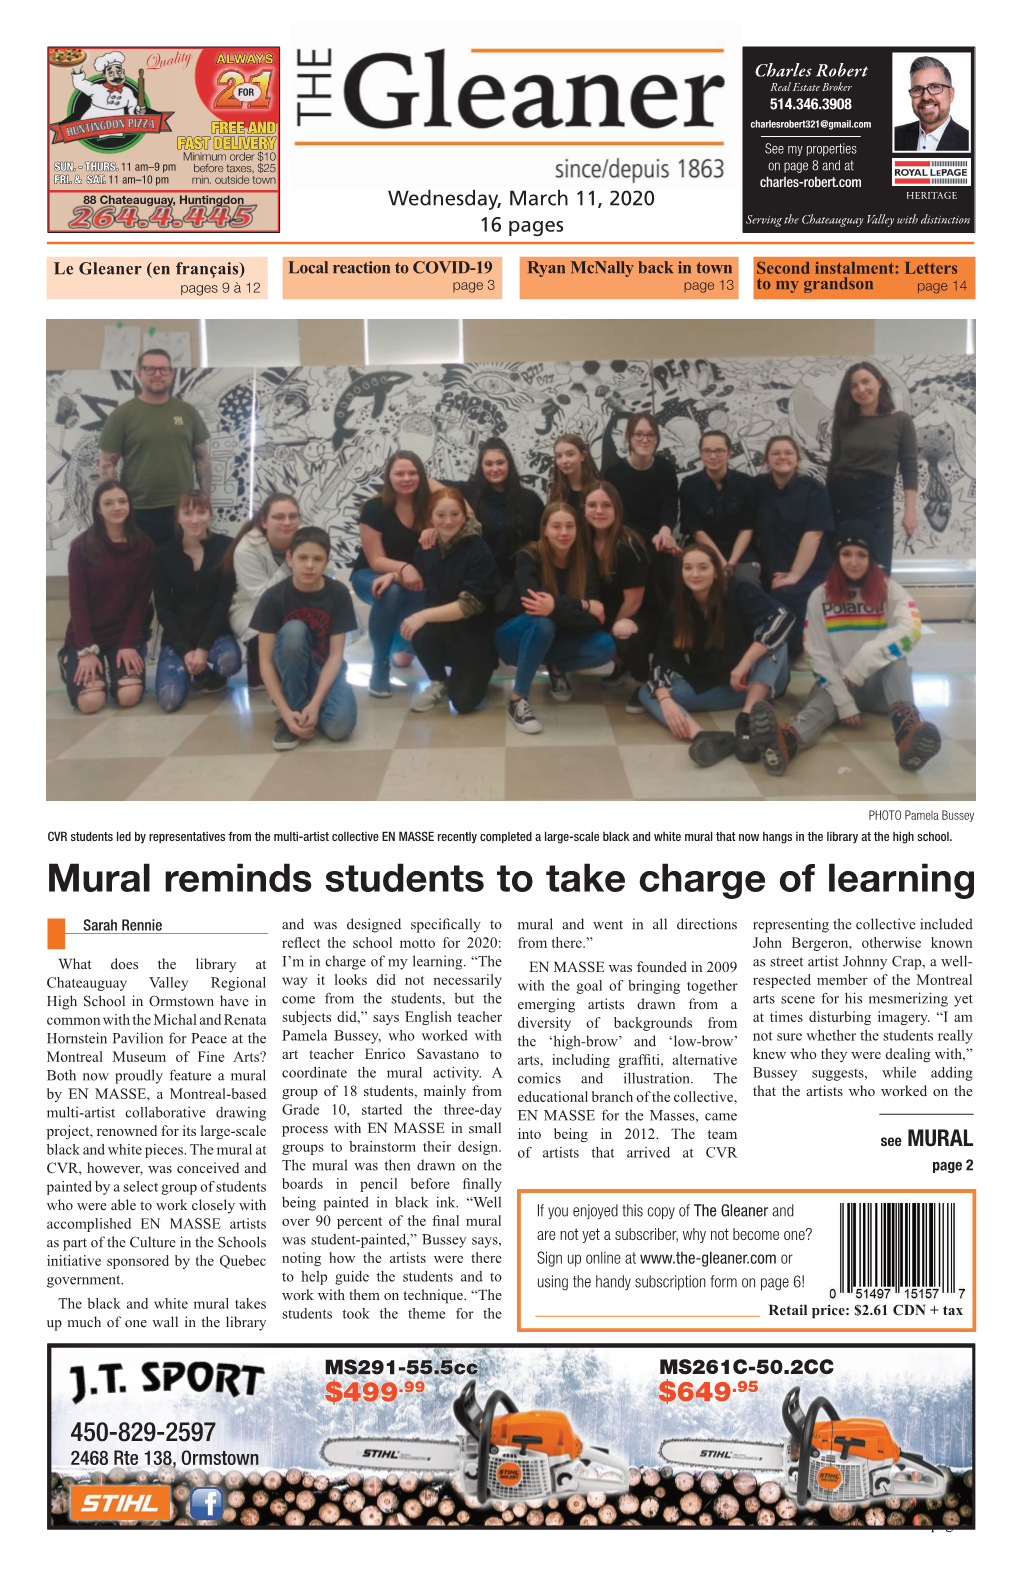 Mural Reminds Students to Take Charge of Learning